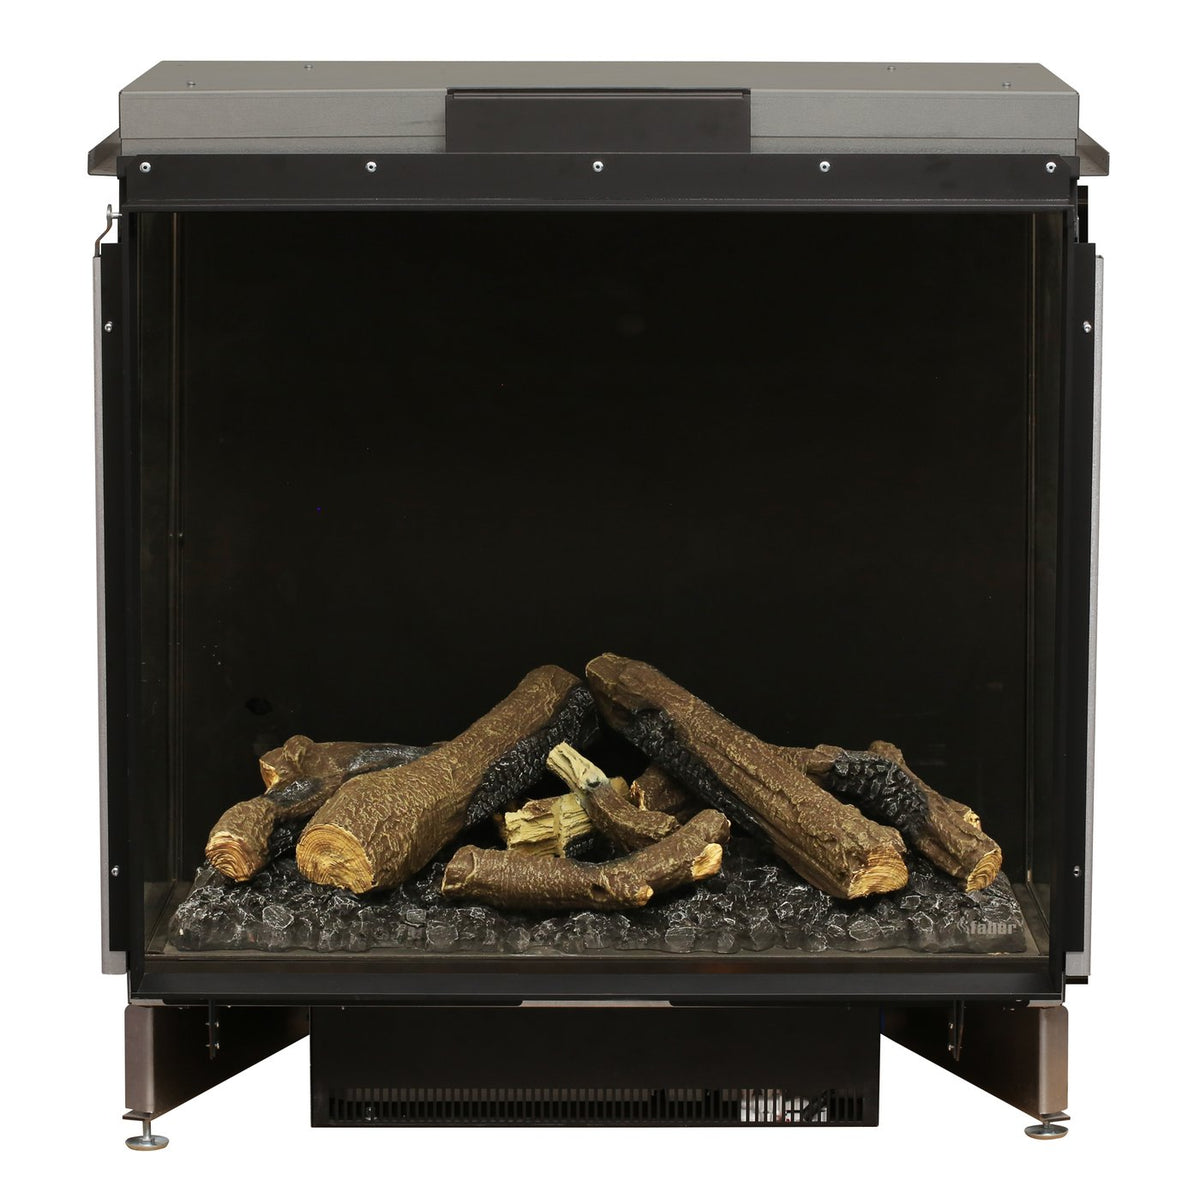 Dimplex Faber e-MatriX Single-Sided Front-Facing Built-in Water Vapor Electric Fireplace